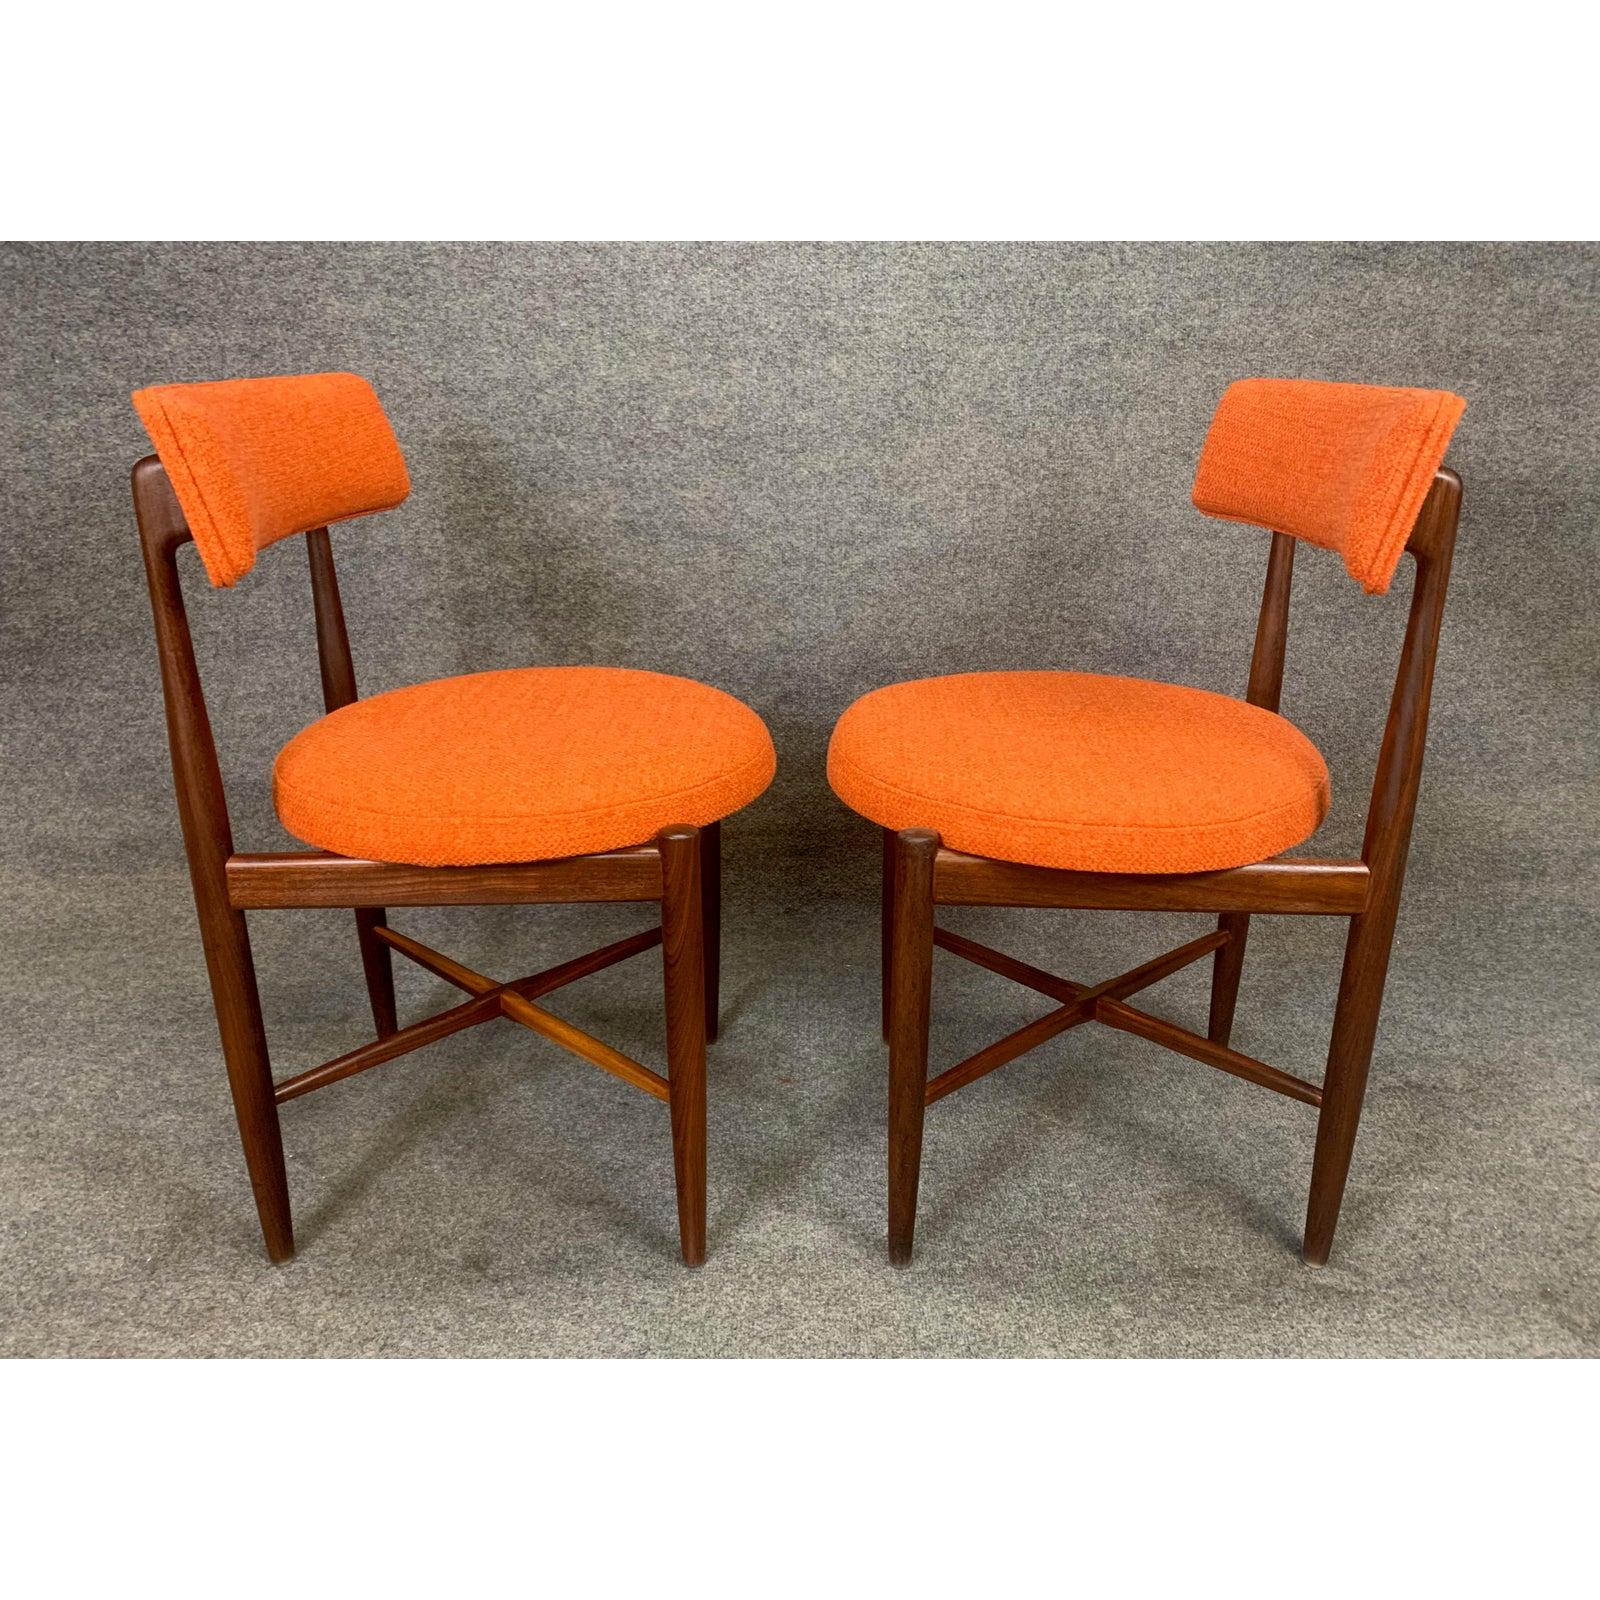 Here is an exquisite pair of vintage side chairs in teak wood designed by Victor Wilkins and manufactured in England in the 1960s. These lovely and comfortable chairs, recently imported form the UK to California before their restoration, feature a